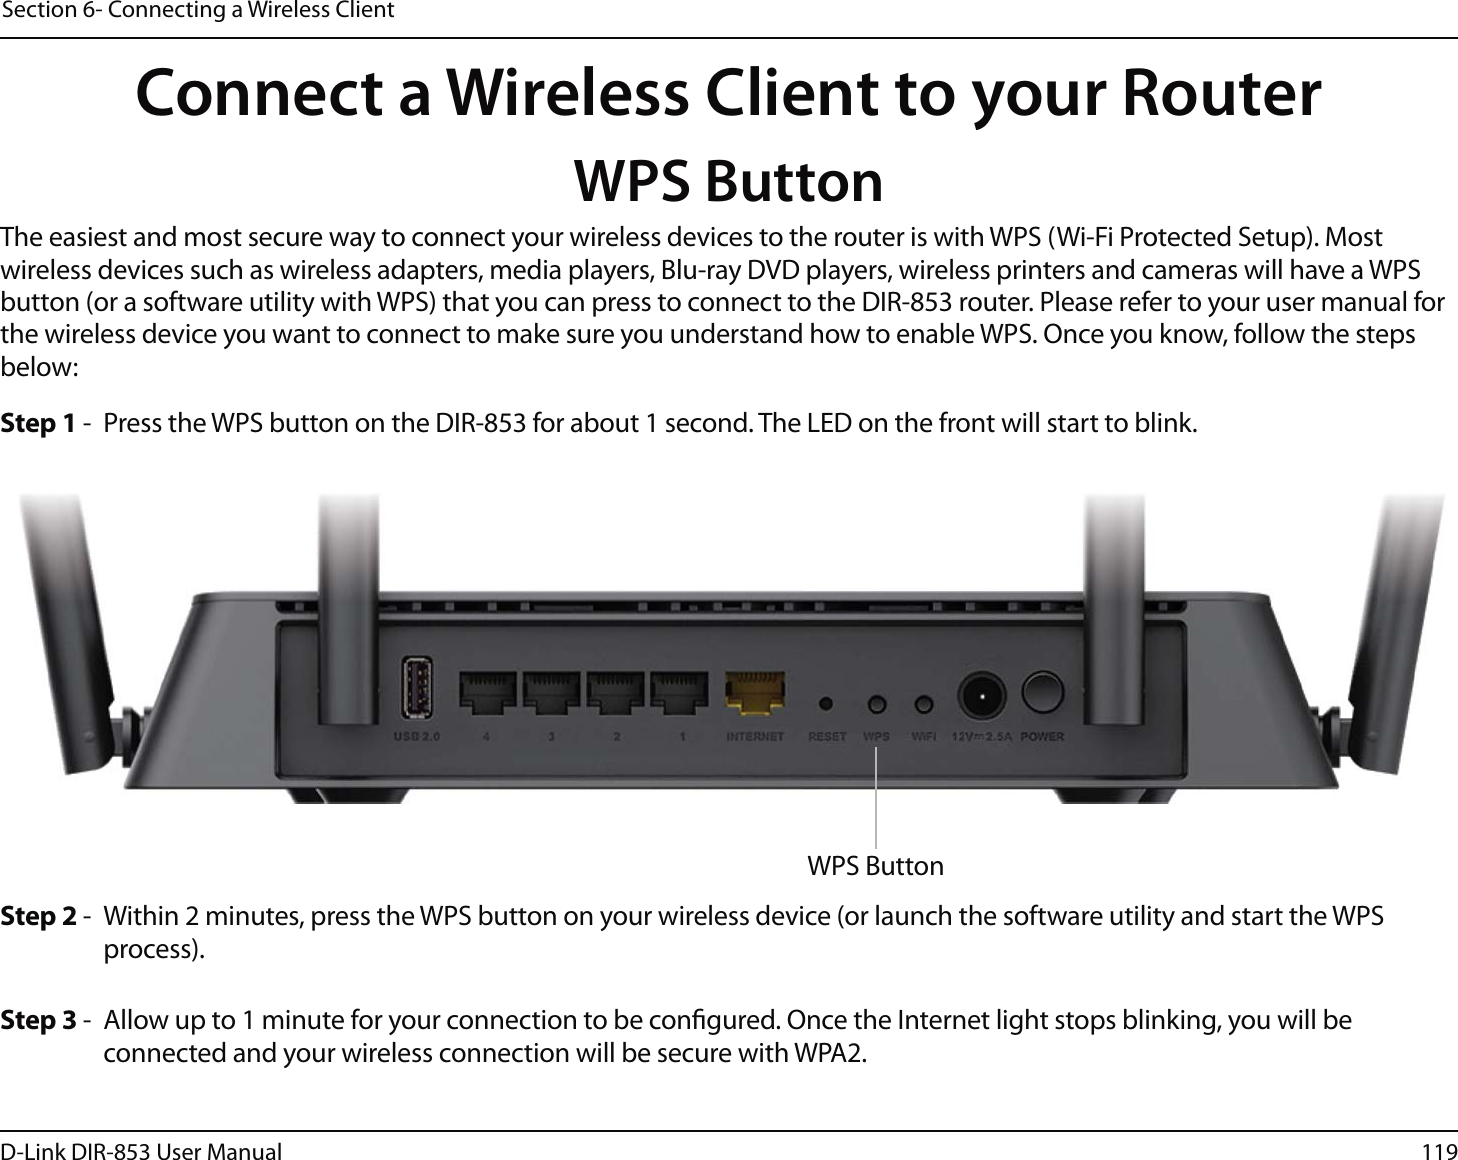 119D-Link DIR-853 User ManualSection 6- Connecting a Wireless ClientConnect a Wireless Client to your RouterWPS ButtonStep 2 -  Within 2 minutes, press the WPS button on your wireless device (or launch the software utility and start the WPS process).The easiest and most secure way to connect your wireless devices to the router is with WPS (Wi-Fi Protected Setup). Most wireless devices such as wireless adapters, media players, Blu-ray DVD players, wireless printers and cameras will have a WPS button (or a software utility with WPS) that you can press to connect to the DIR-853 router. Please refer to your user manual for the wireless device you want to connect to make sure you understand how to enable WPS. Once you know, follow the steps below:Step 1 -  Press the WPS button on the DIR-853 for about 1 second. The LED on the front will start to blink.Step 3 -  Allow up to 1 minute for your connection to be congured. Once the Internet light stops blinking, you will be connected and your wireless connection will be secure with WPA2.WPS Button